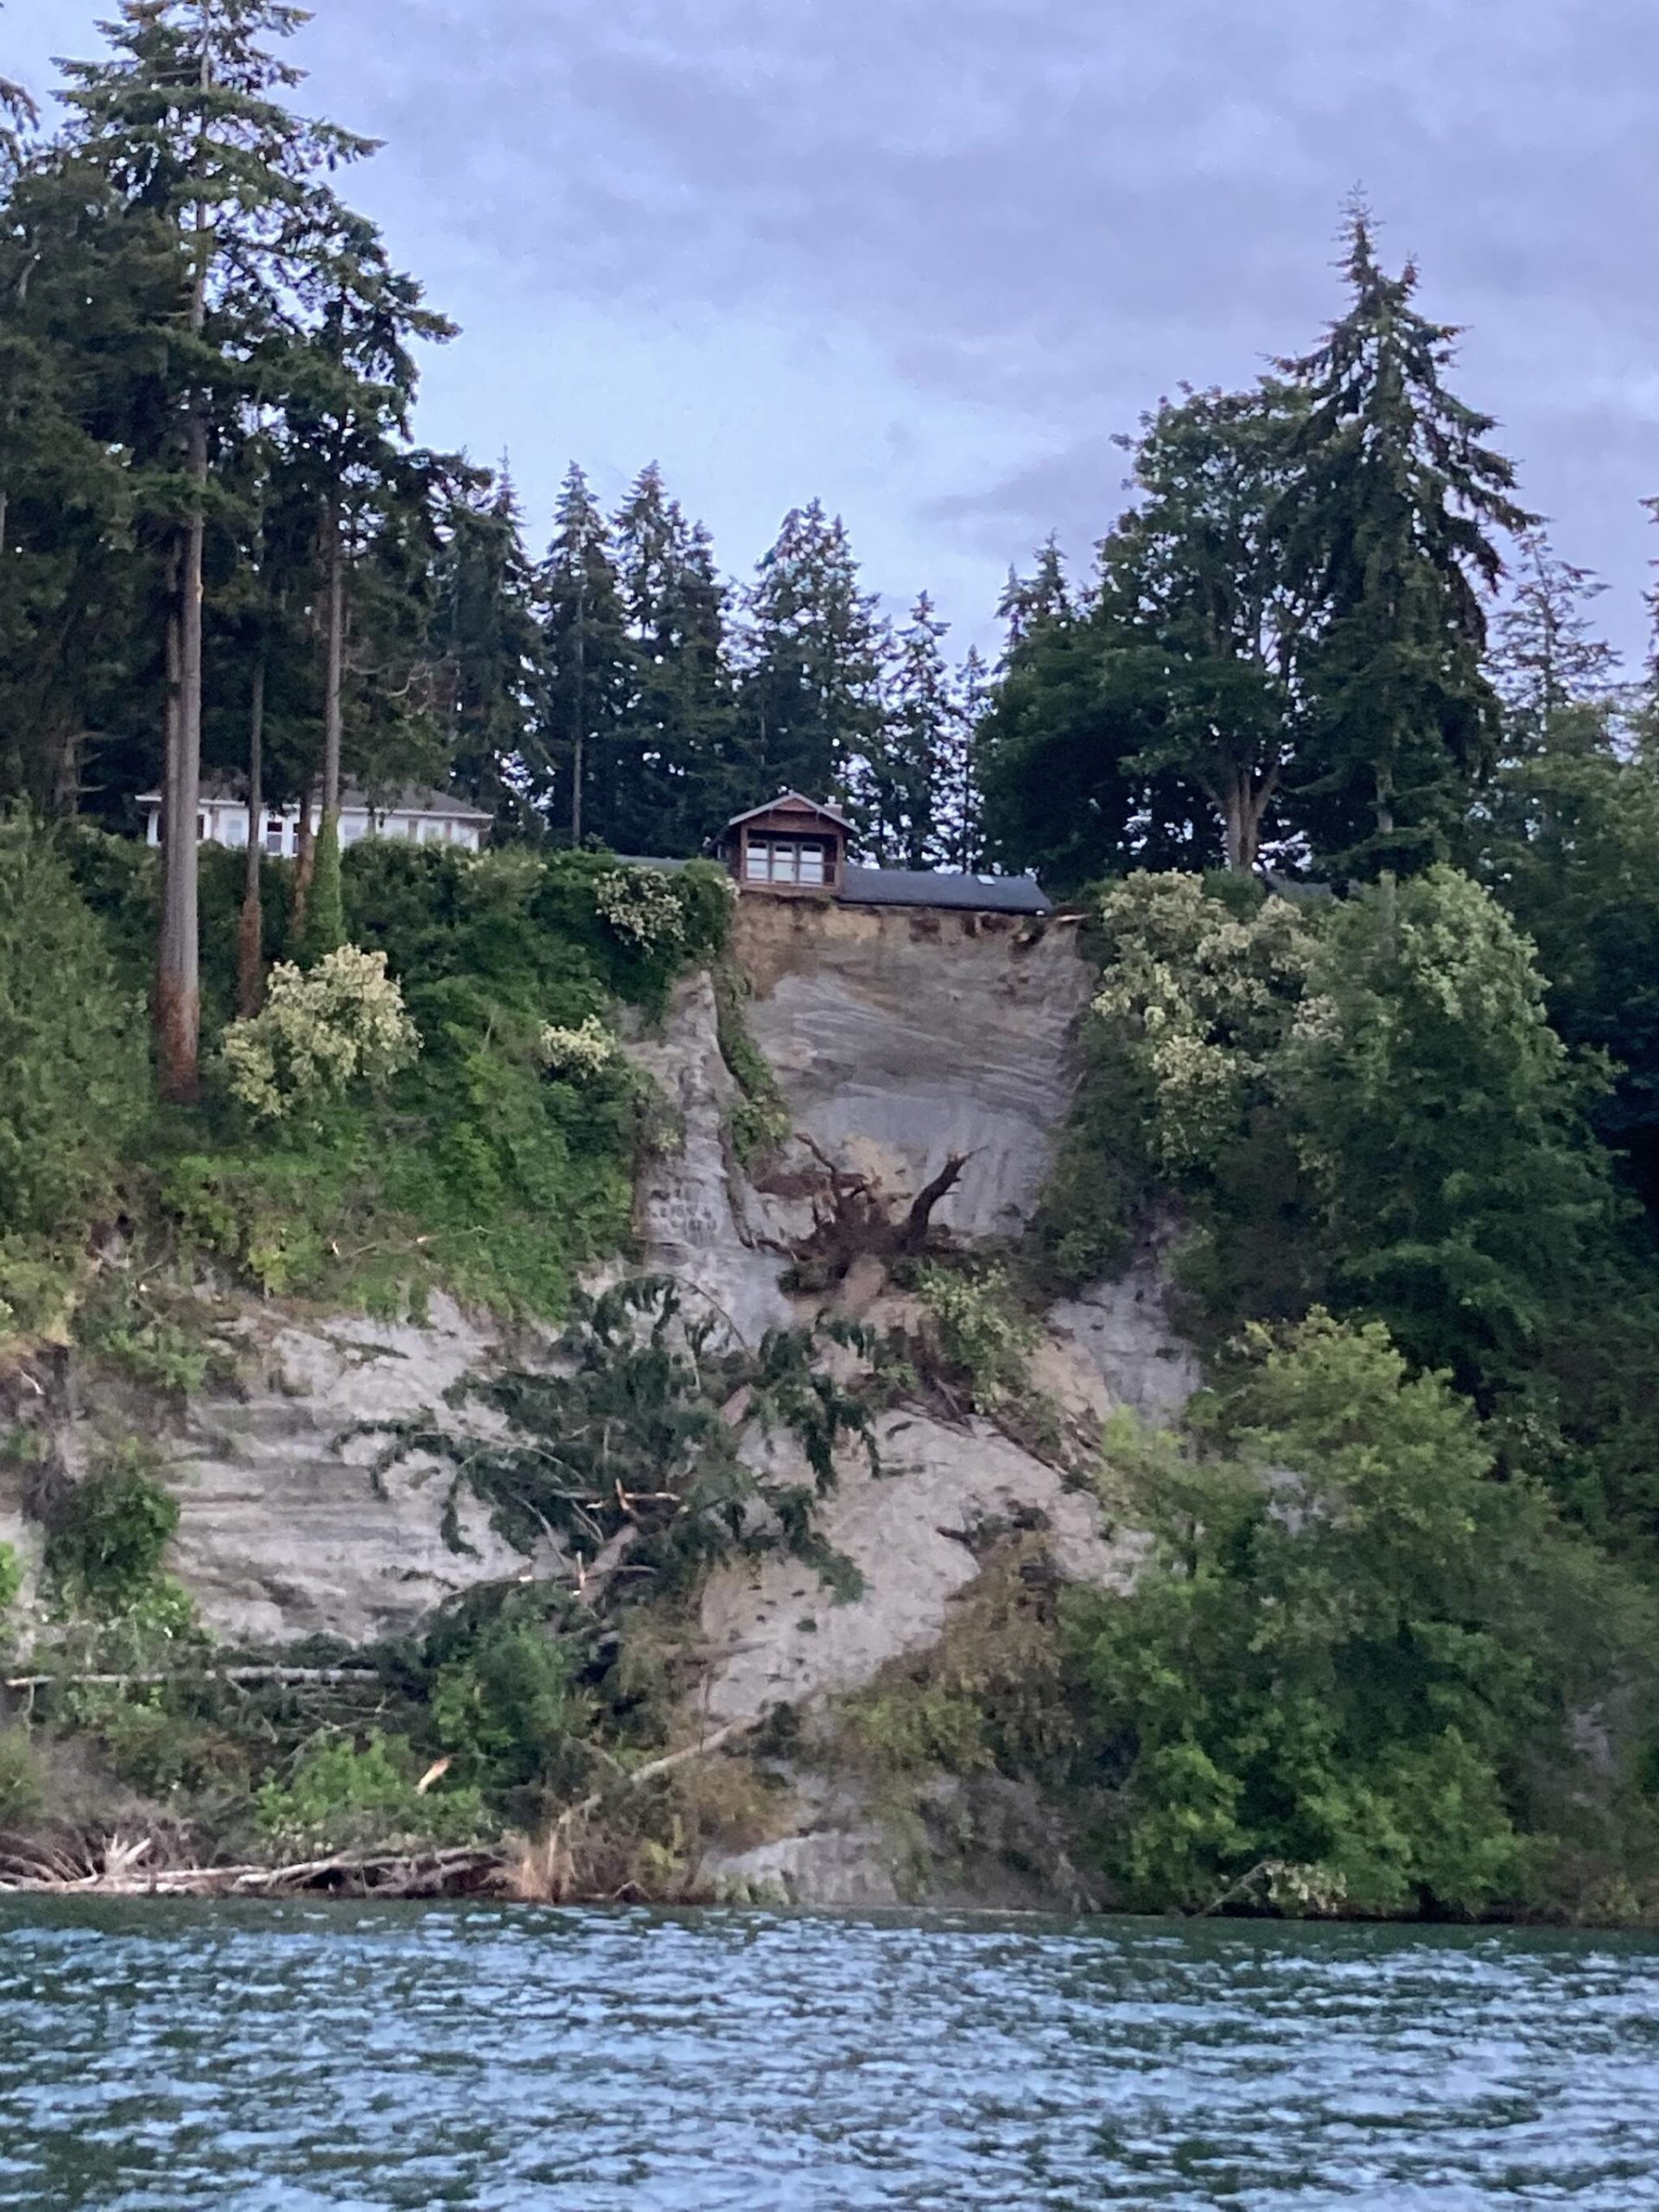 Photo submitted
A landslide on a bluff near Langley took out some trees.